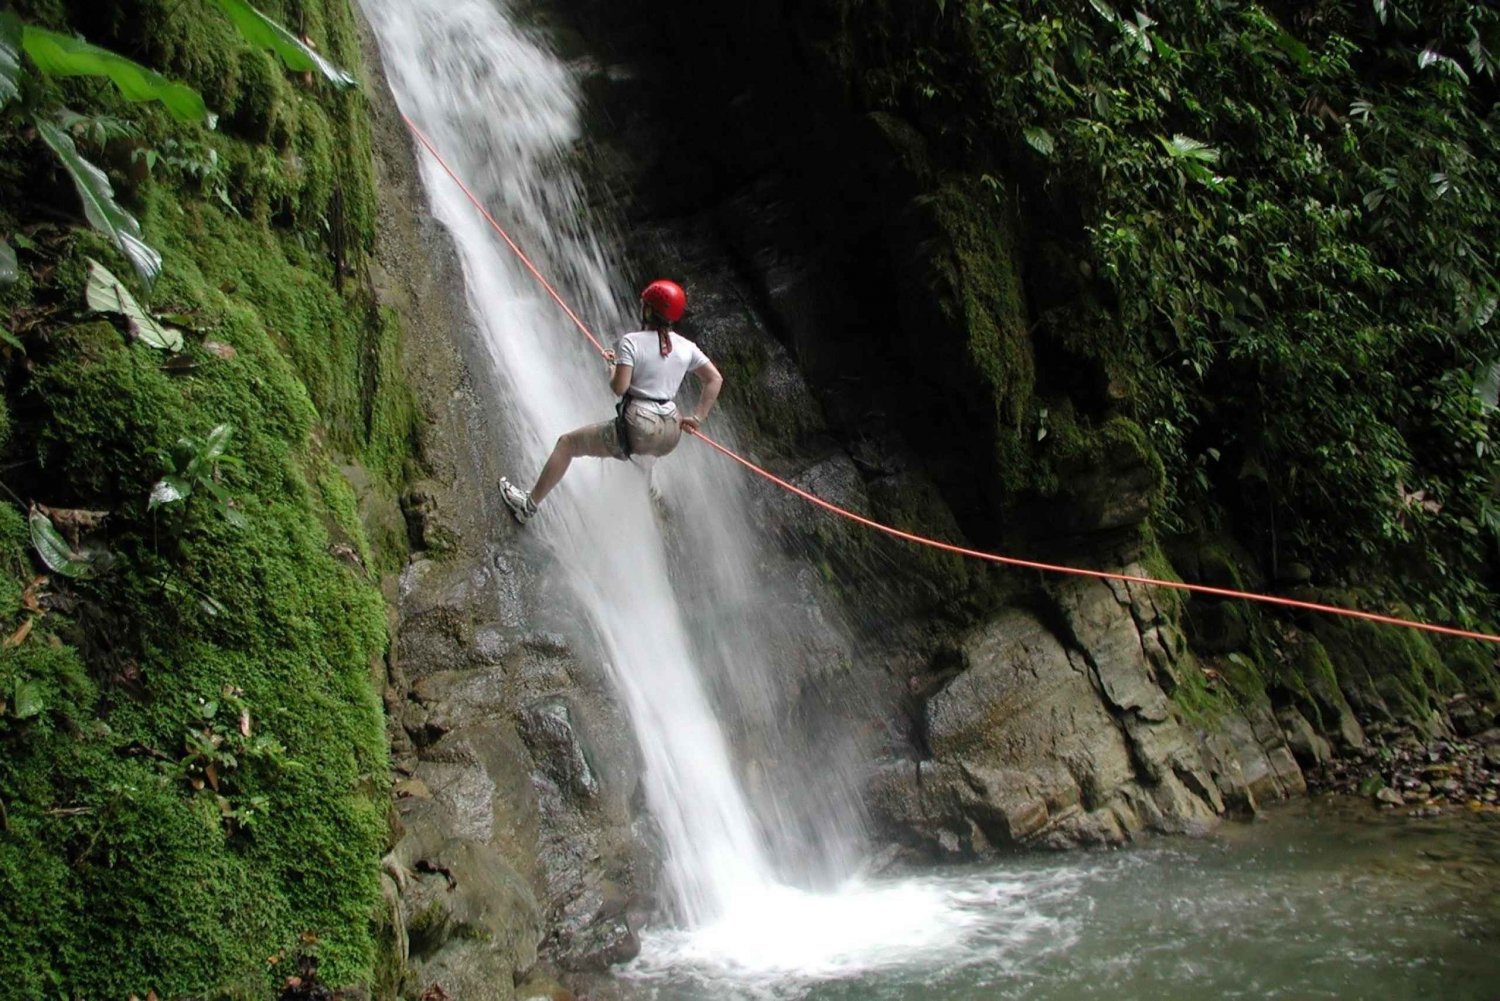 9e volledige dag: canyoning, La Fortuna waterval, Arenal vulkaan